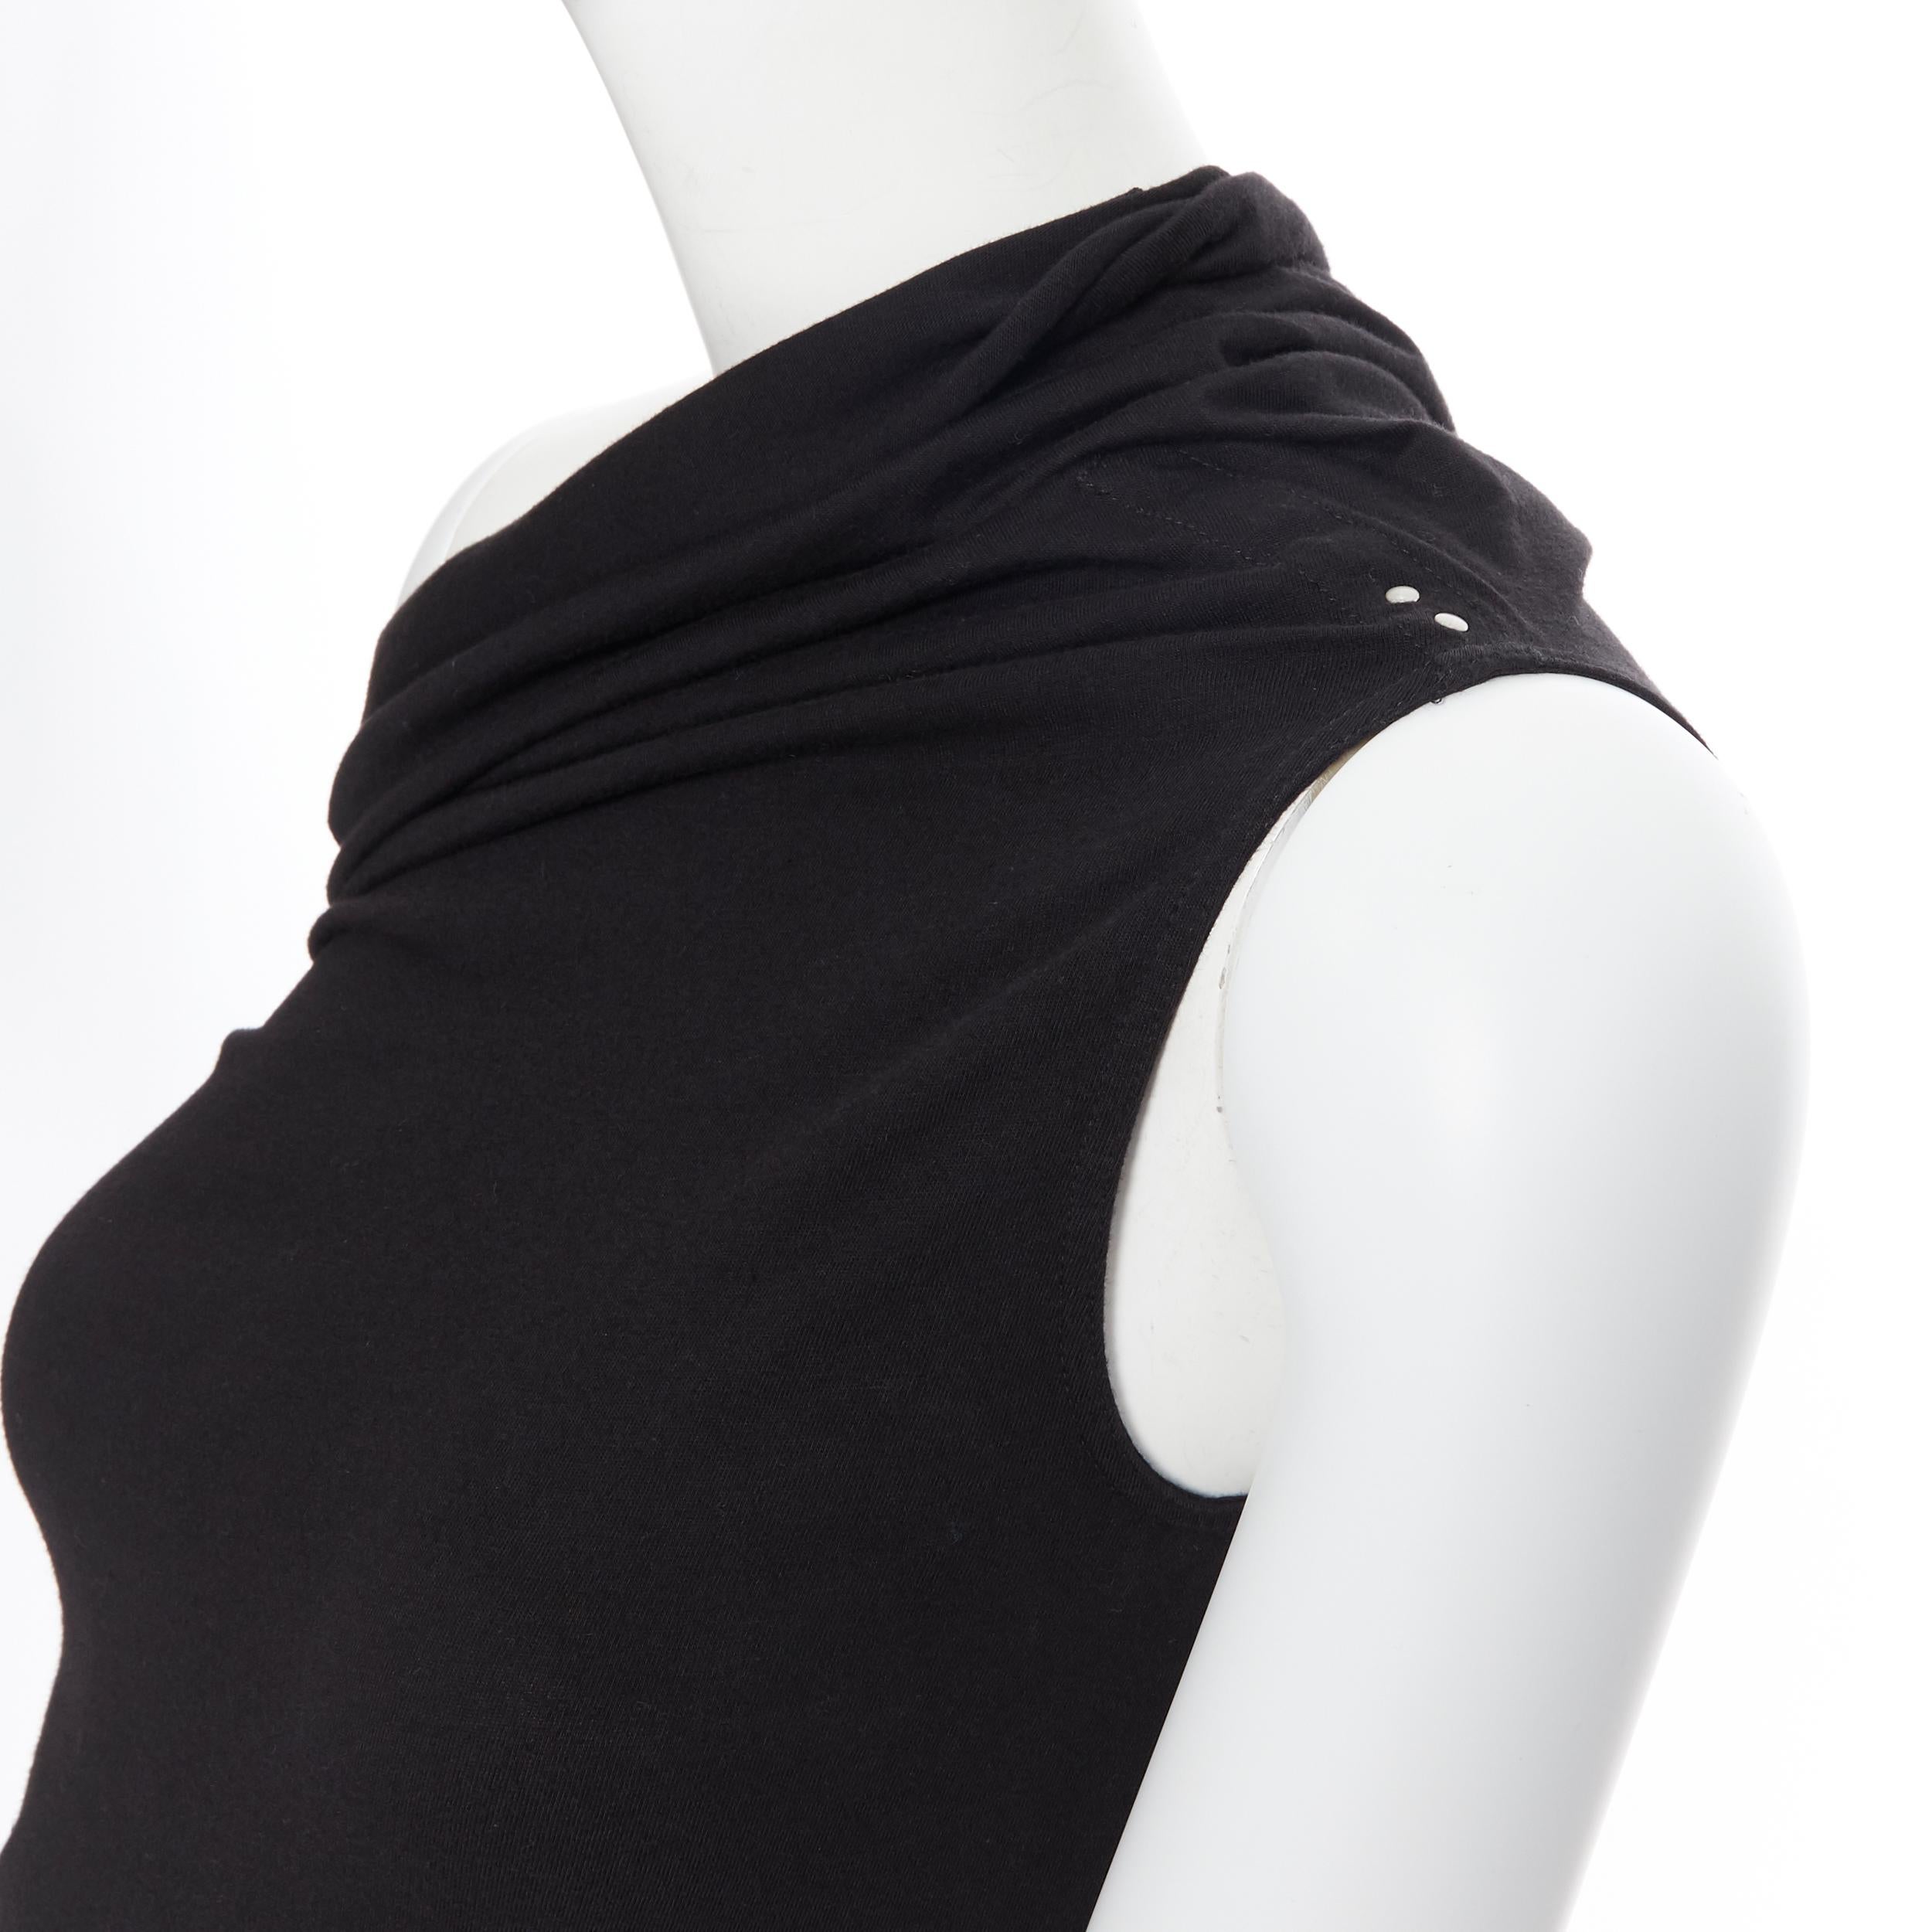 new RICK OWENS AW18 Sisyphus black cotton asymmetric one shoulder top IT40 S
Brand: Rick Owens
Designer: Rick Owens
Collection: Fall Winter 2018
Model Name / Style: One shoulder top
Material: Cotton
Color: Black
Pattern: Solid
Extra Detail: Stretch